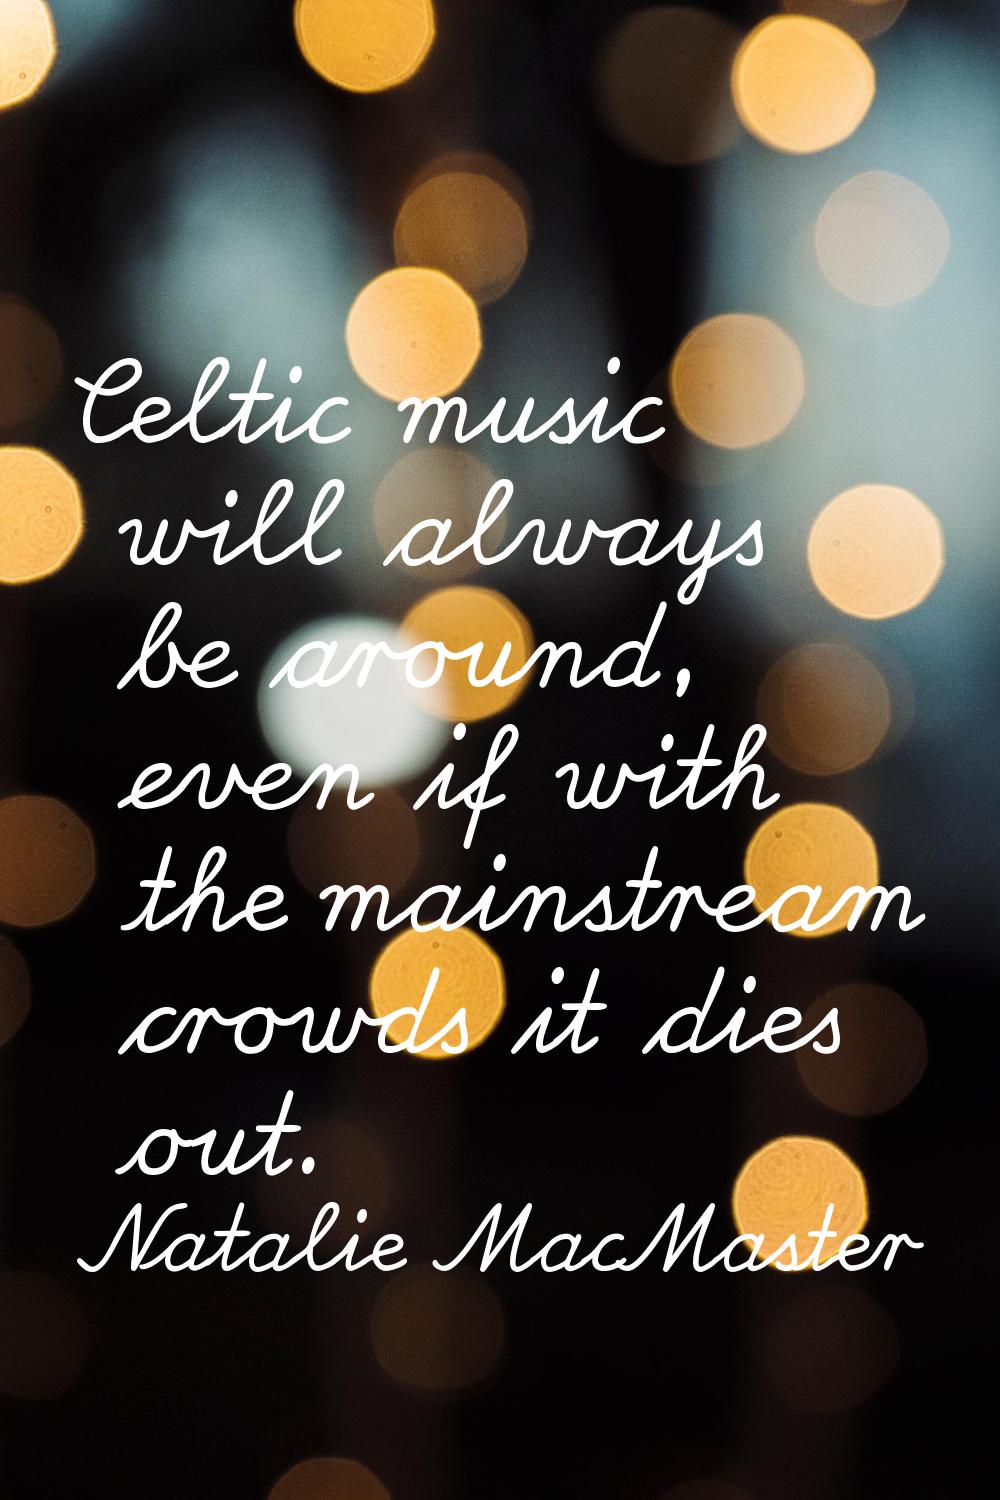 Celtic music will always be around, even if with the mainstream crowds it dies out.